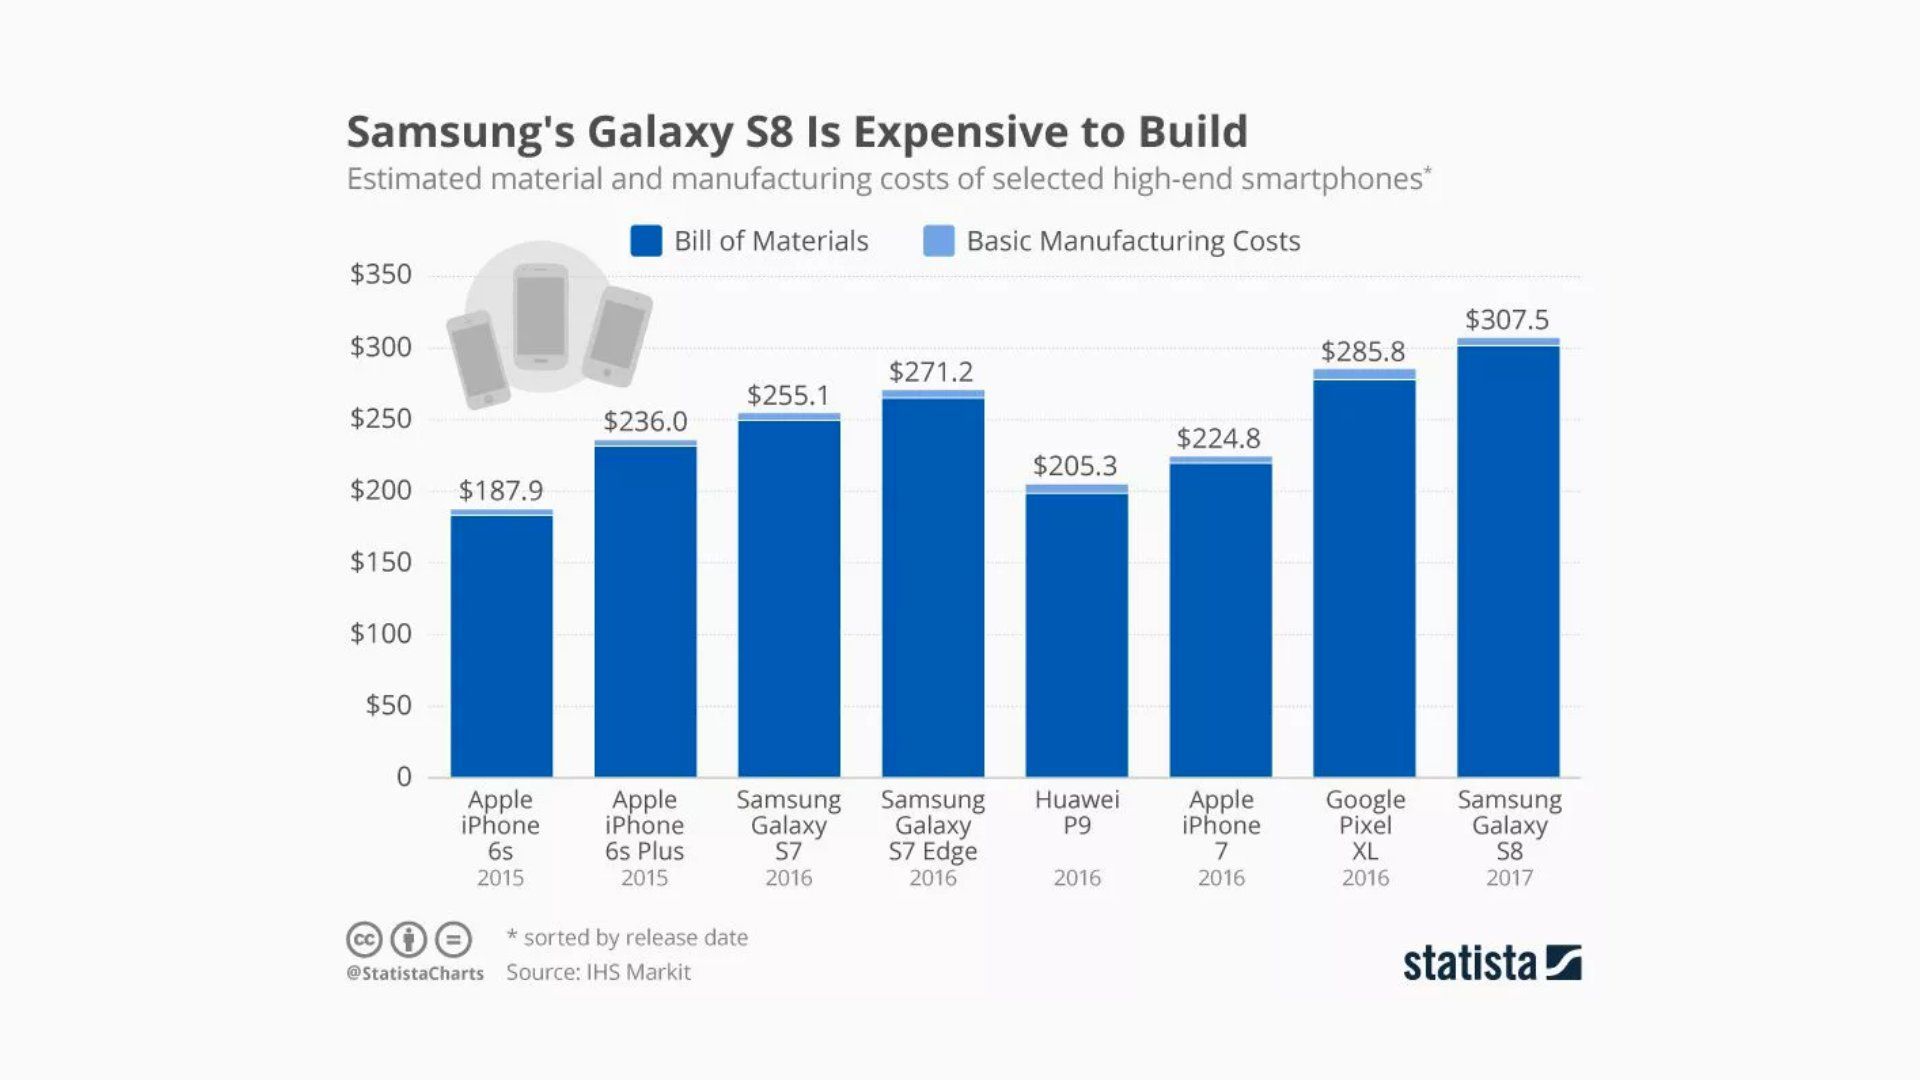 Samsung Galaxy S8 - Manufacturing Cost